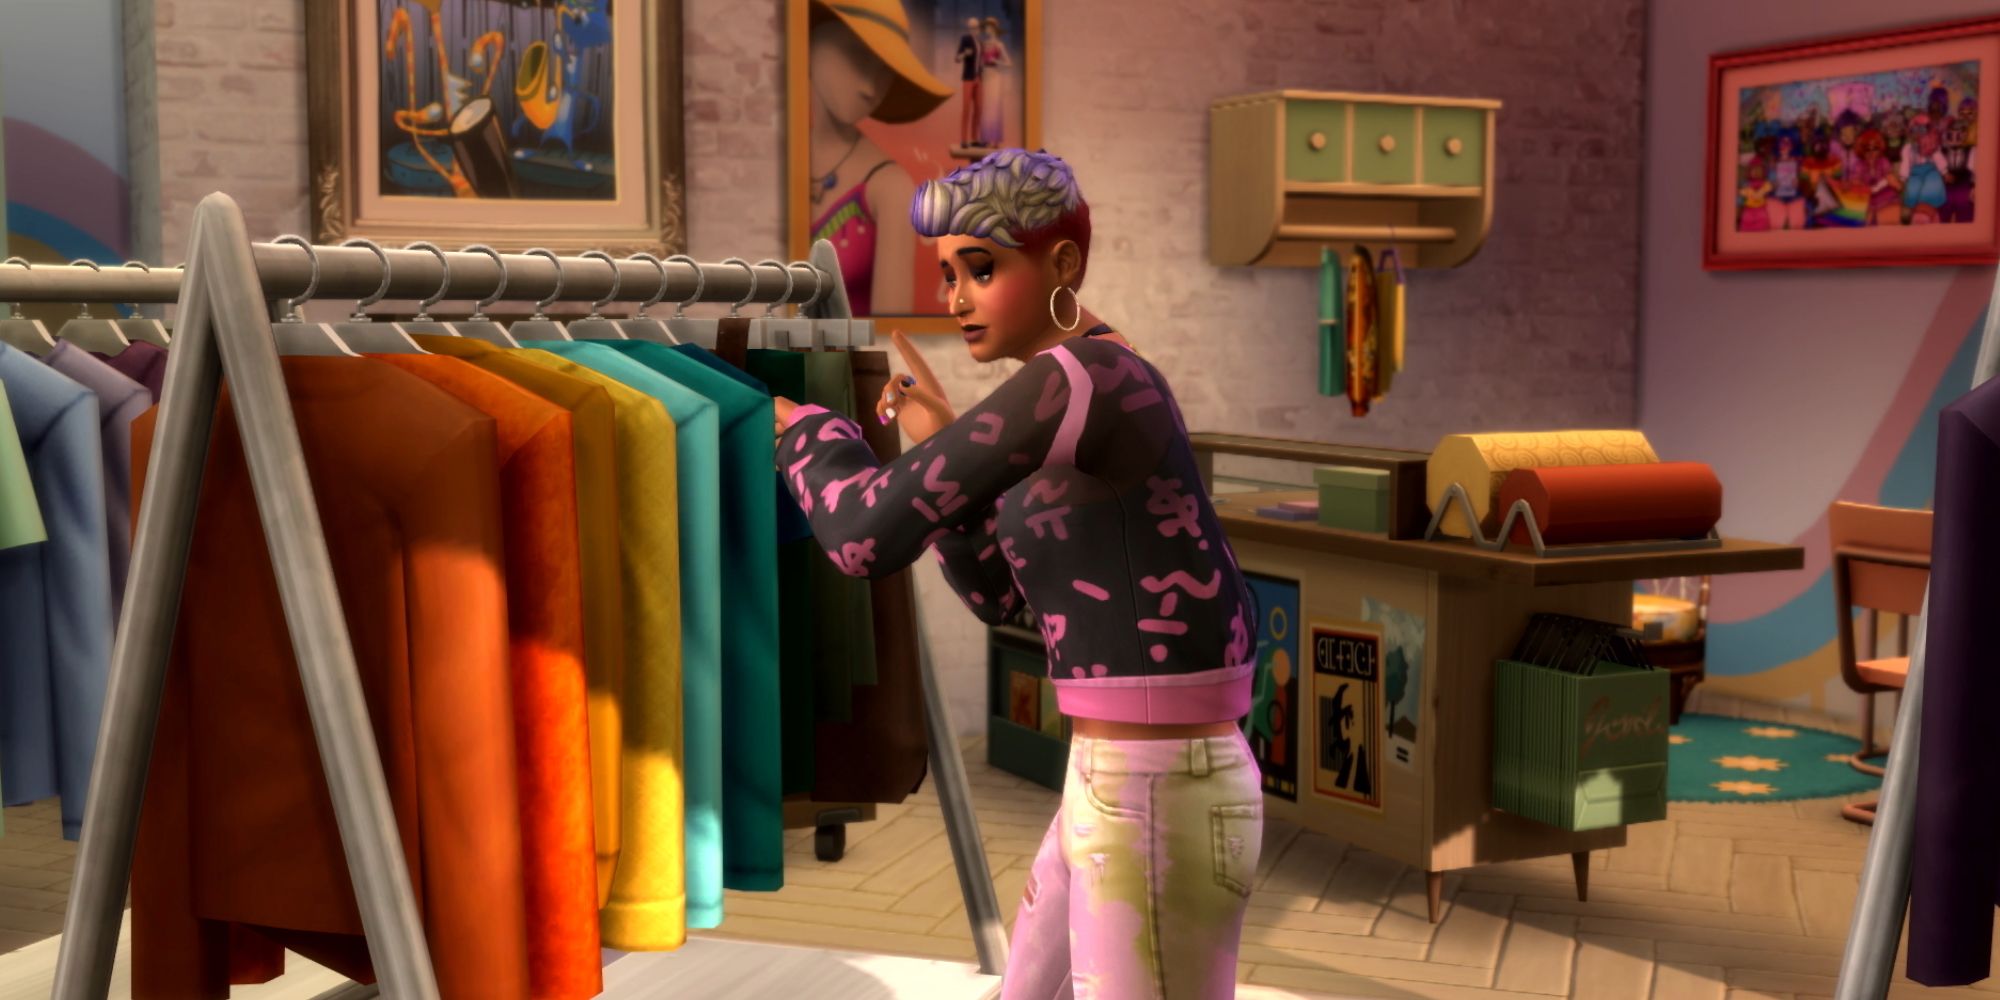 TS4 teen at the thrift store checking clothes